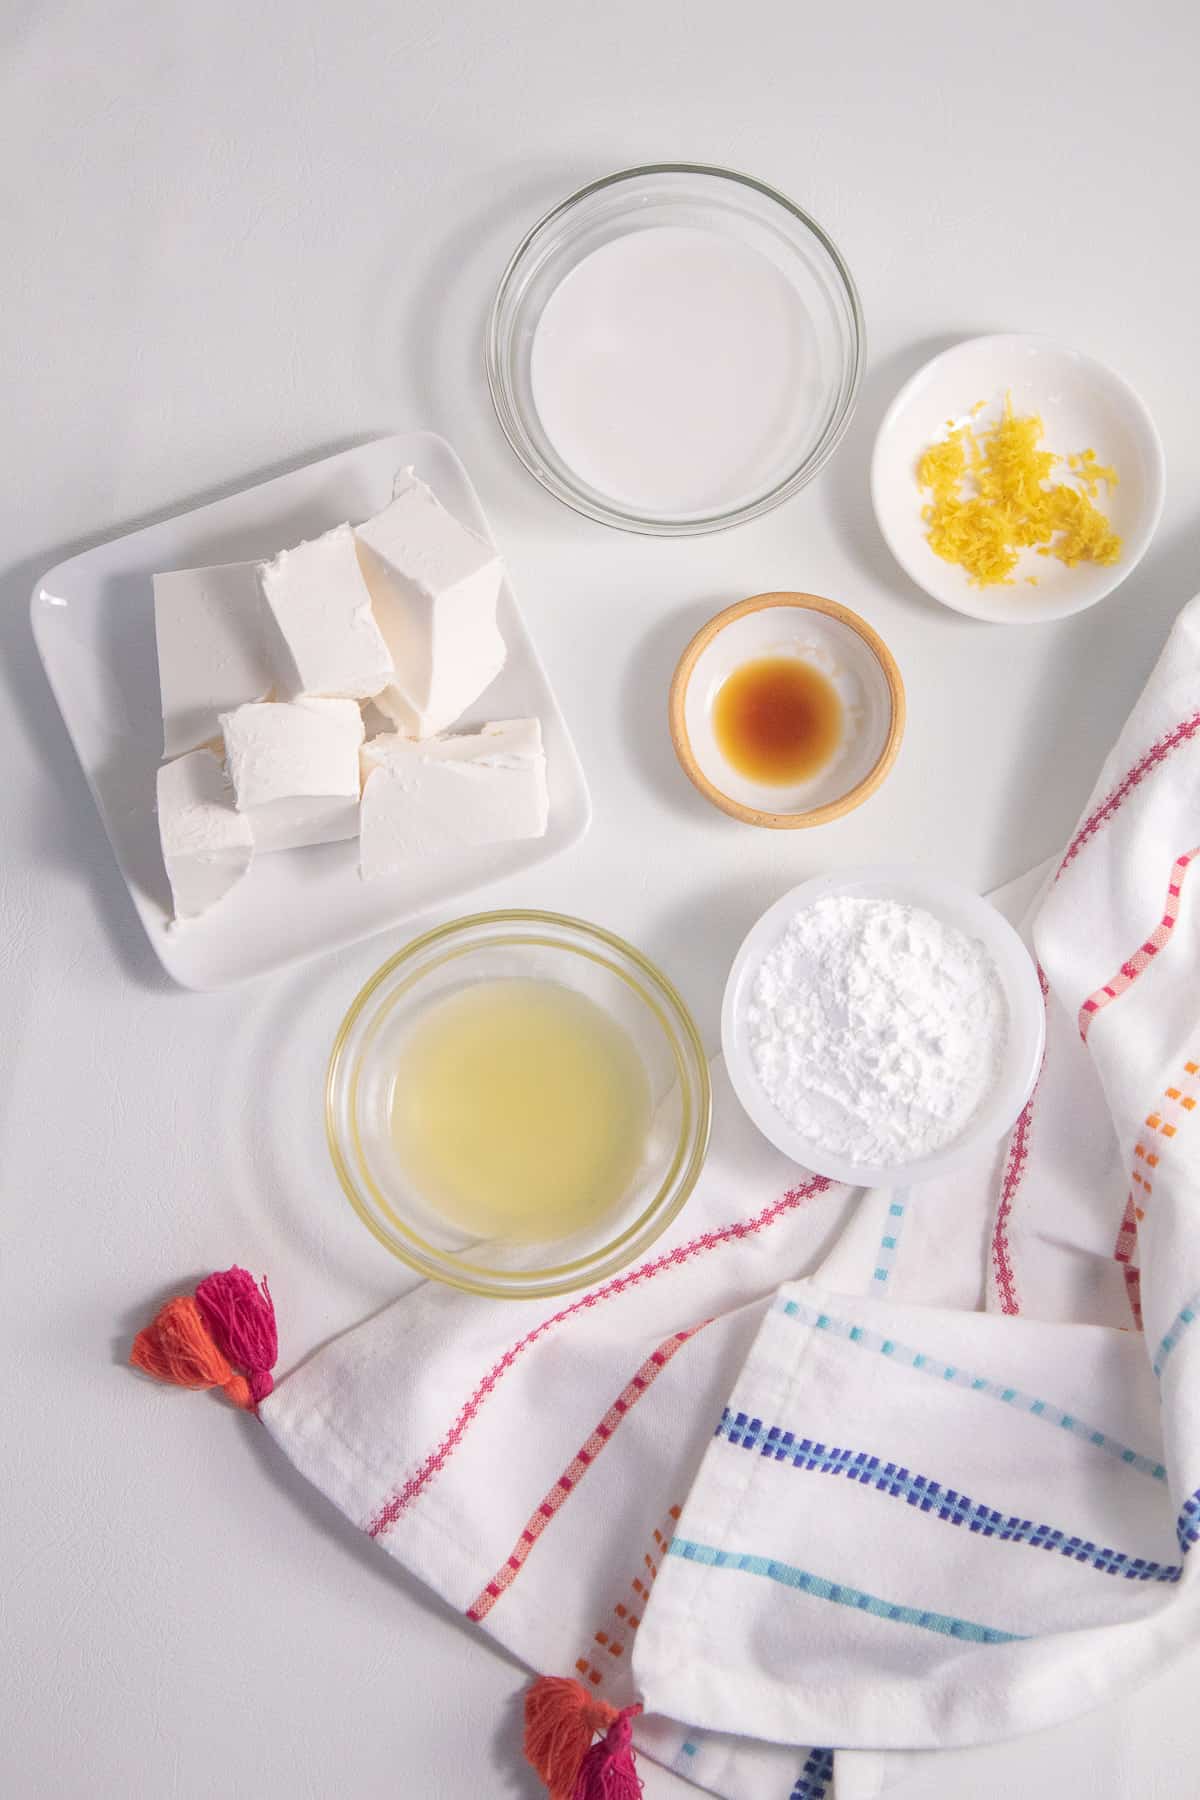 Ingredients for the fruit dip are arranged on a white surface.